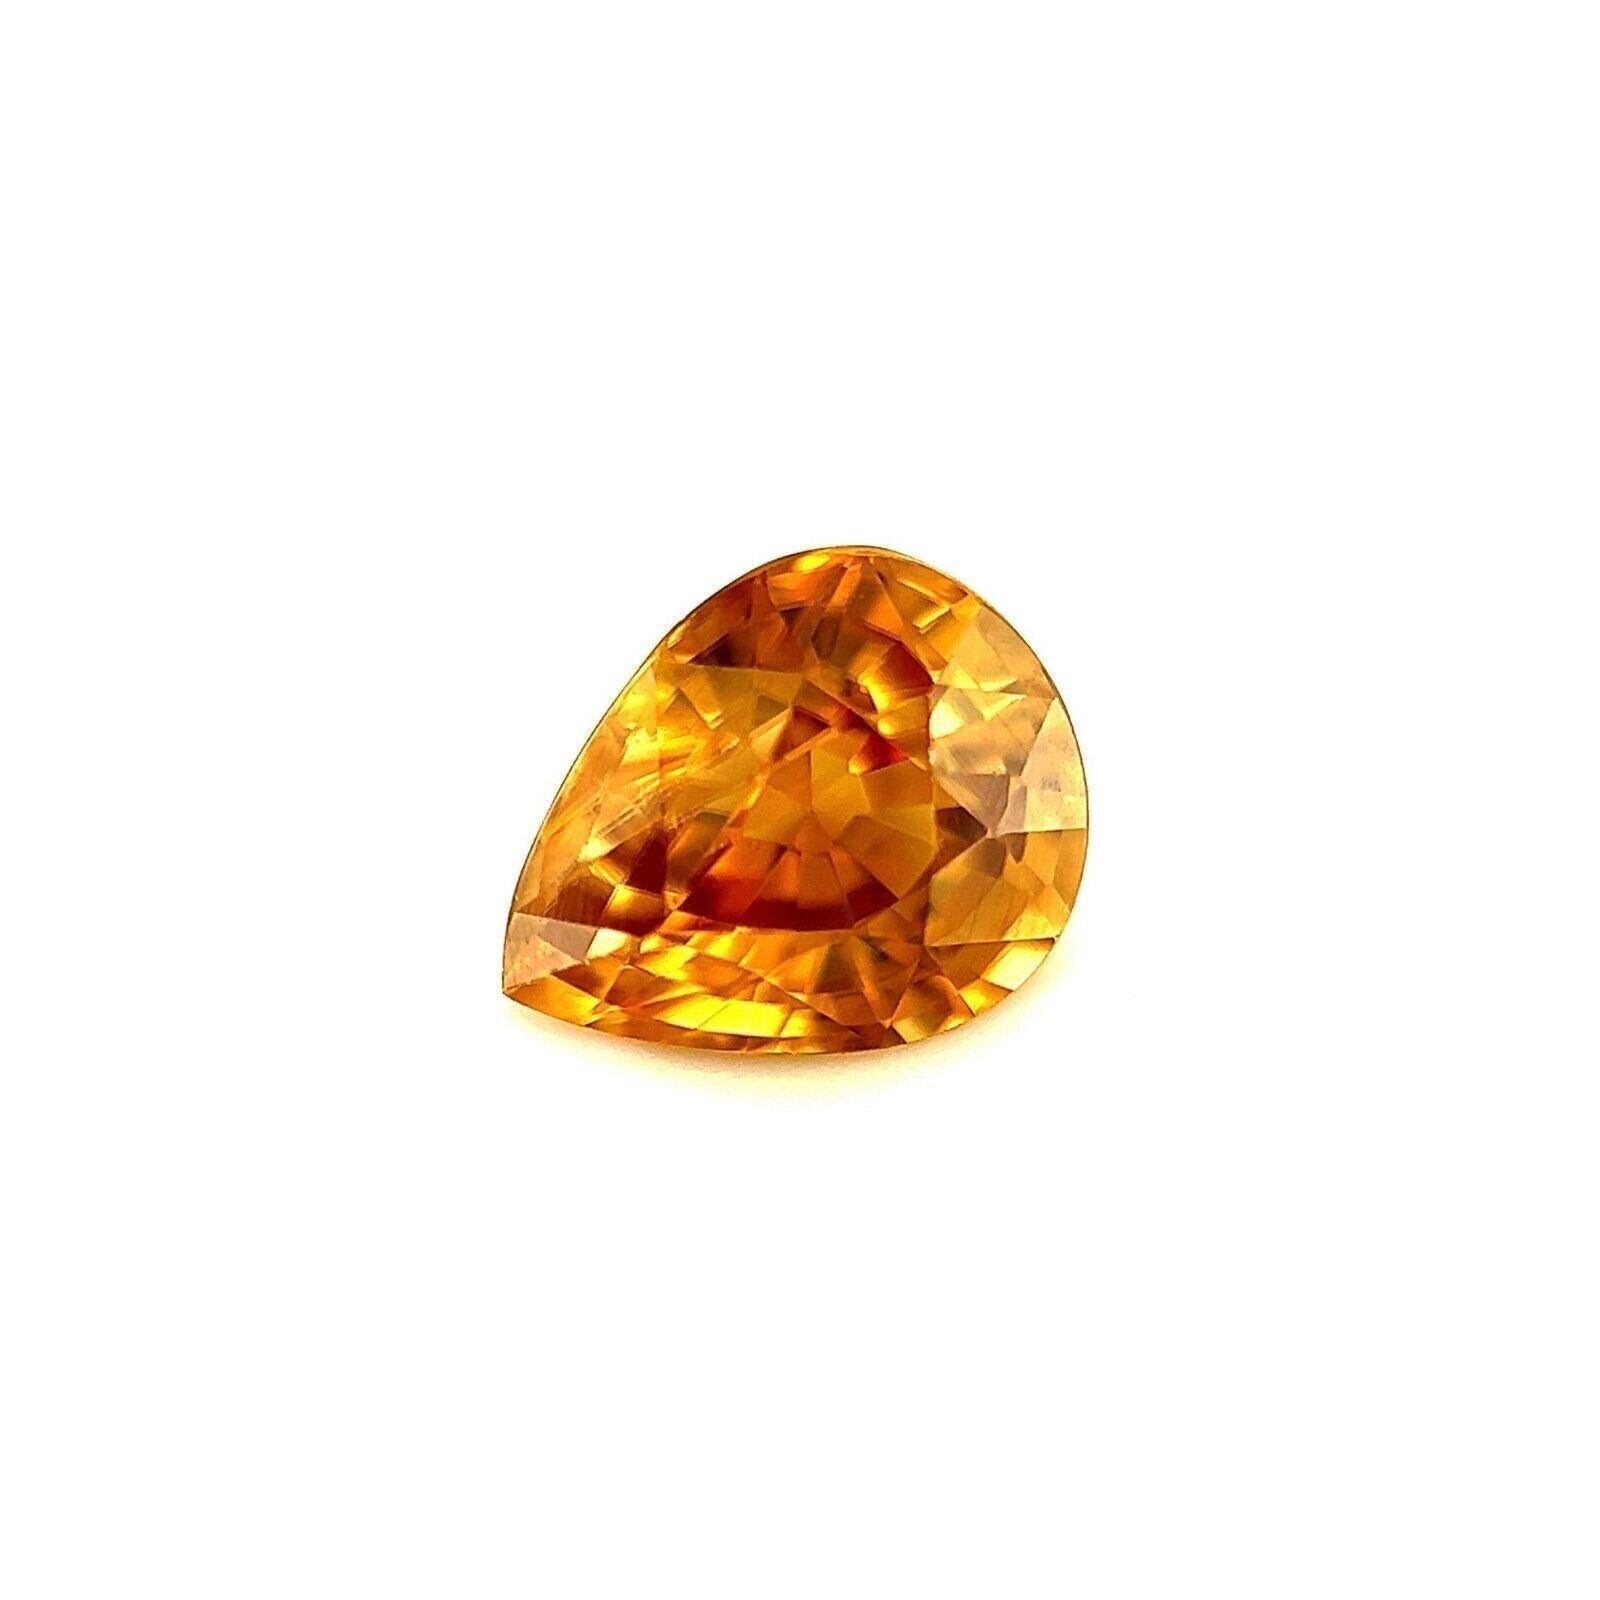 1.54ct Vivid Yellow Orange Natural Zircon Pear Cut Unheated Loose Gem 7.3x6mm

Natural Vivid Yellow Zircon.
1.54 Carat with a beautiful yellow colour and very good clarity, a clean stone with only some small natural inclusions visible when looking